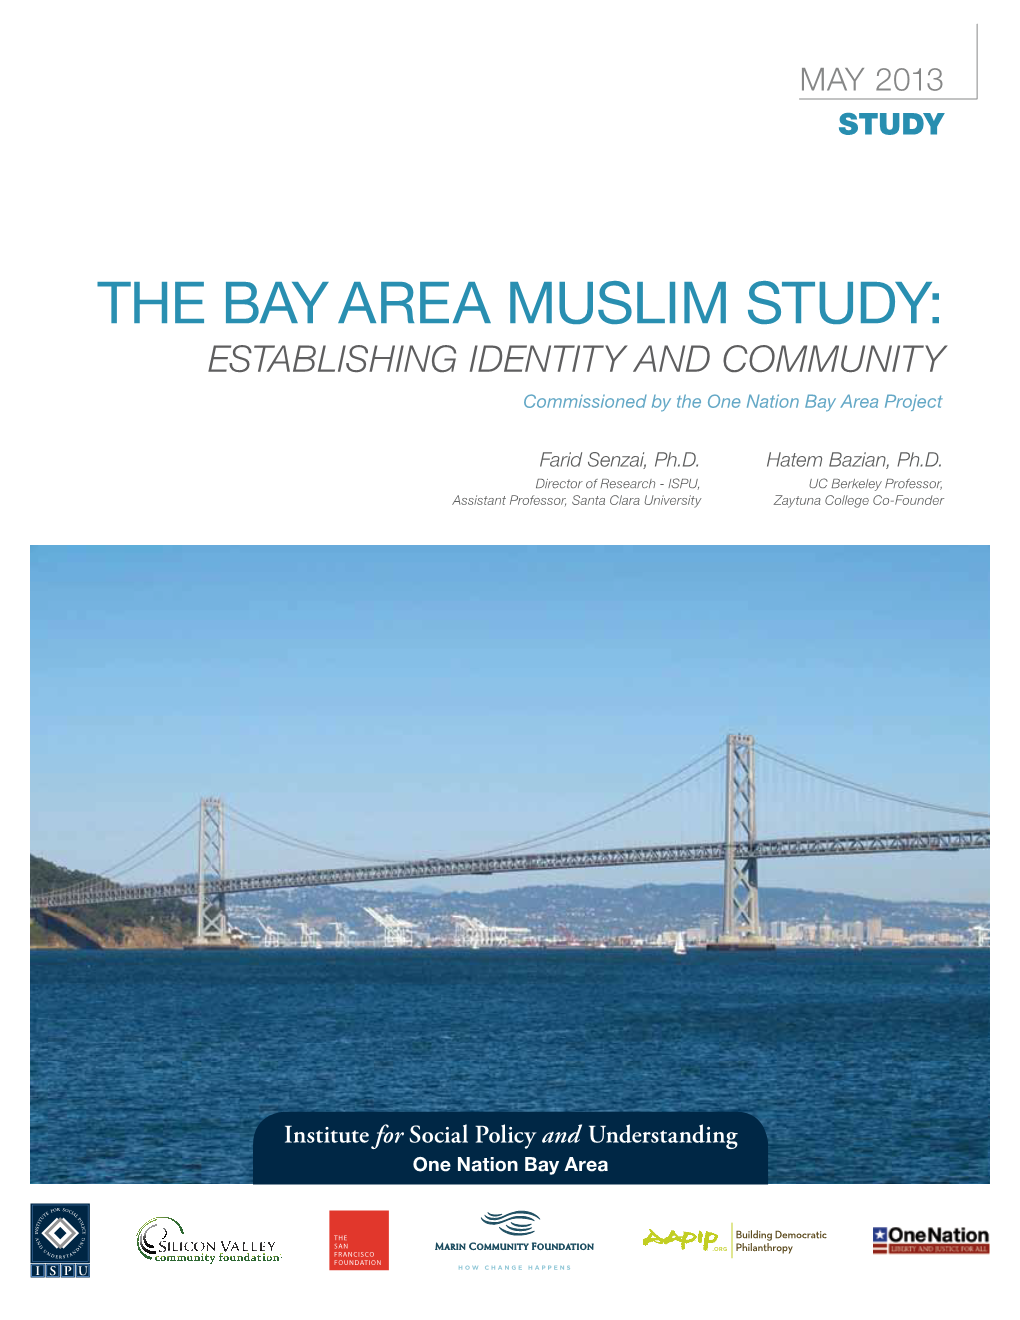 The Bay Area Muslim Study: Establishing Identity and Community Commissioned by the One Nation Bay Area Project